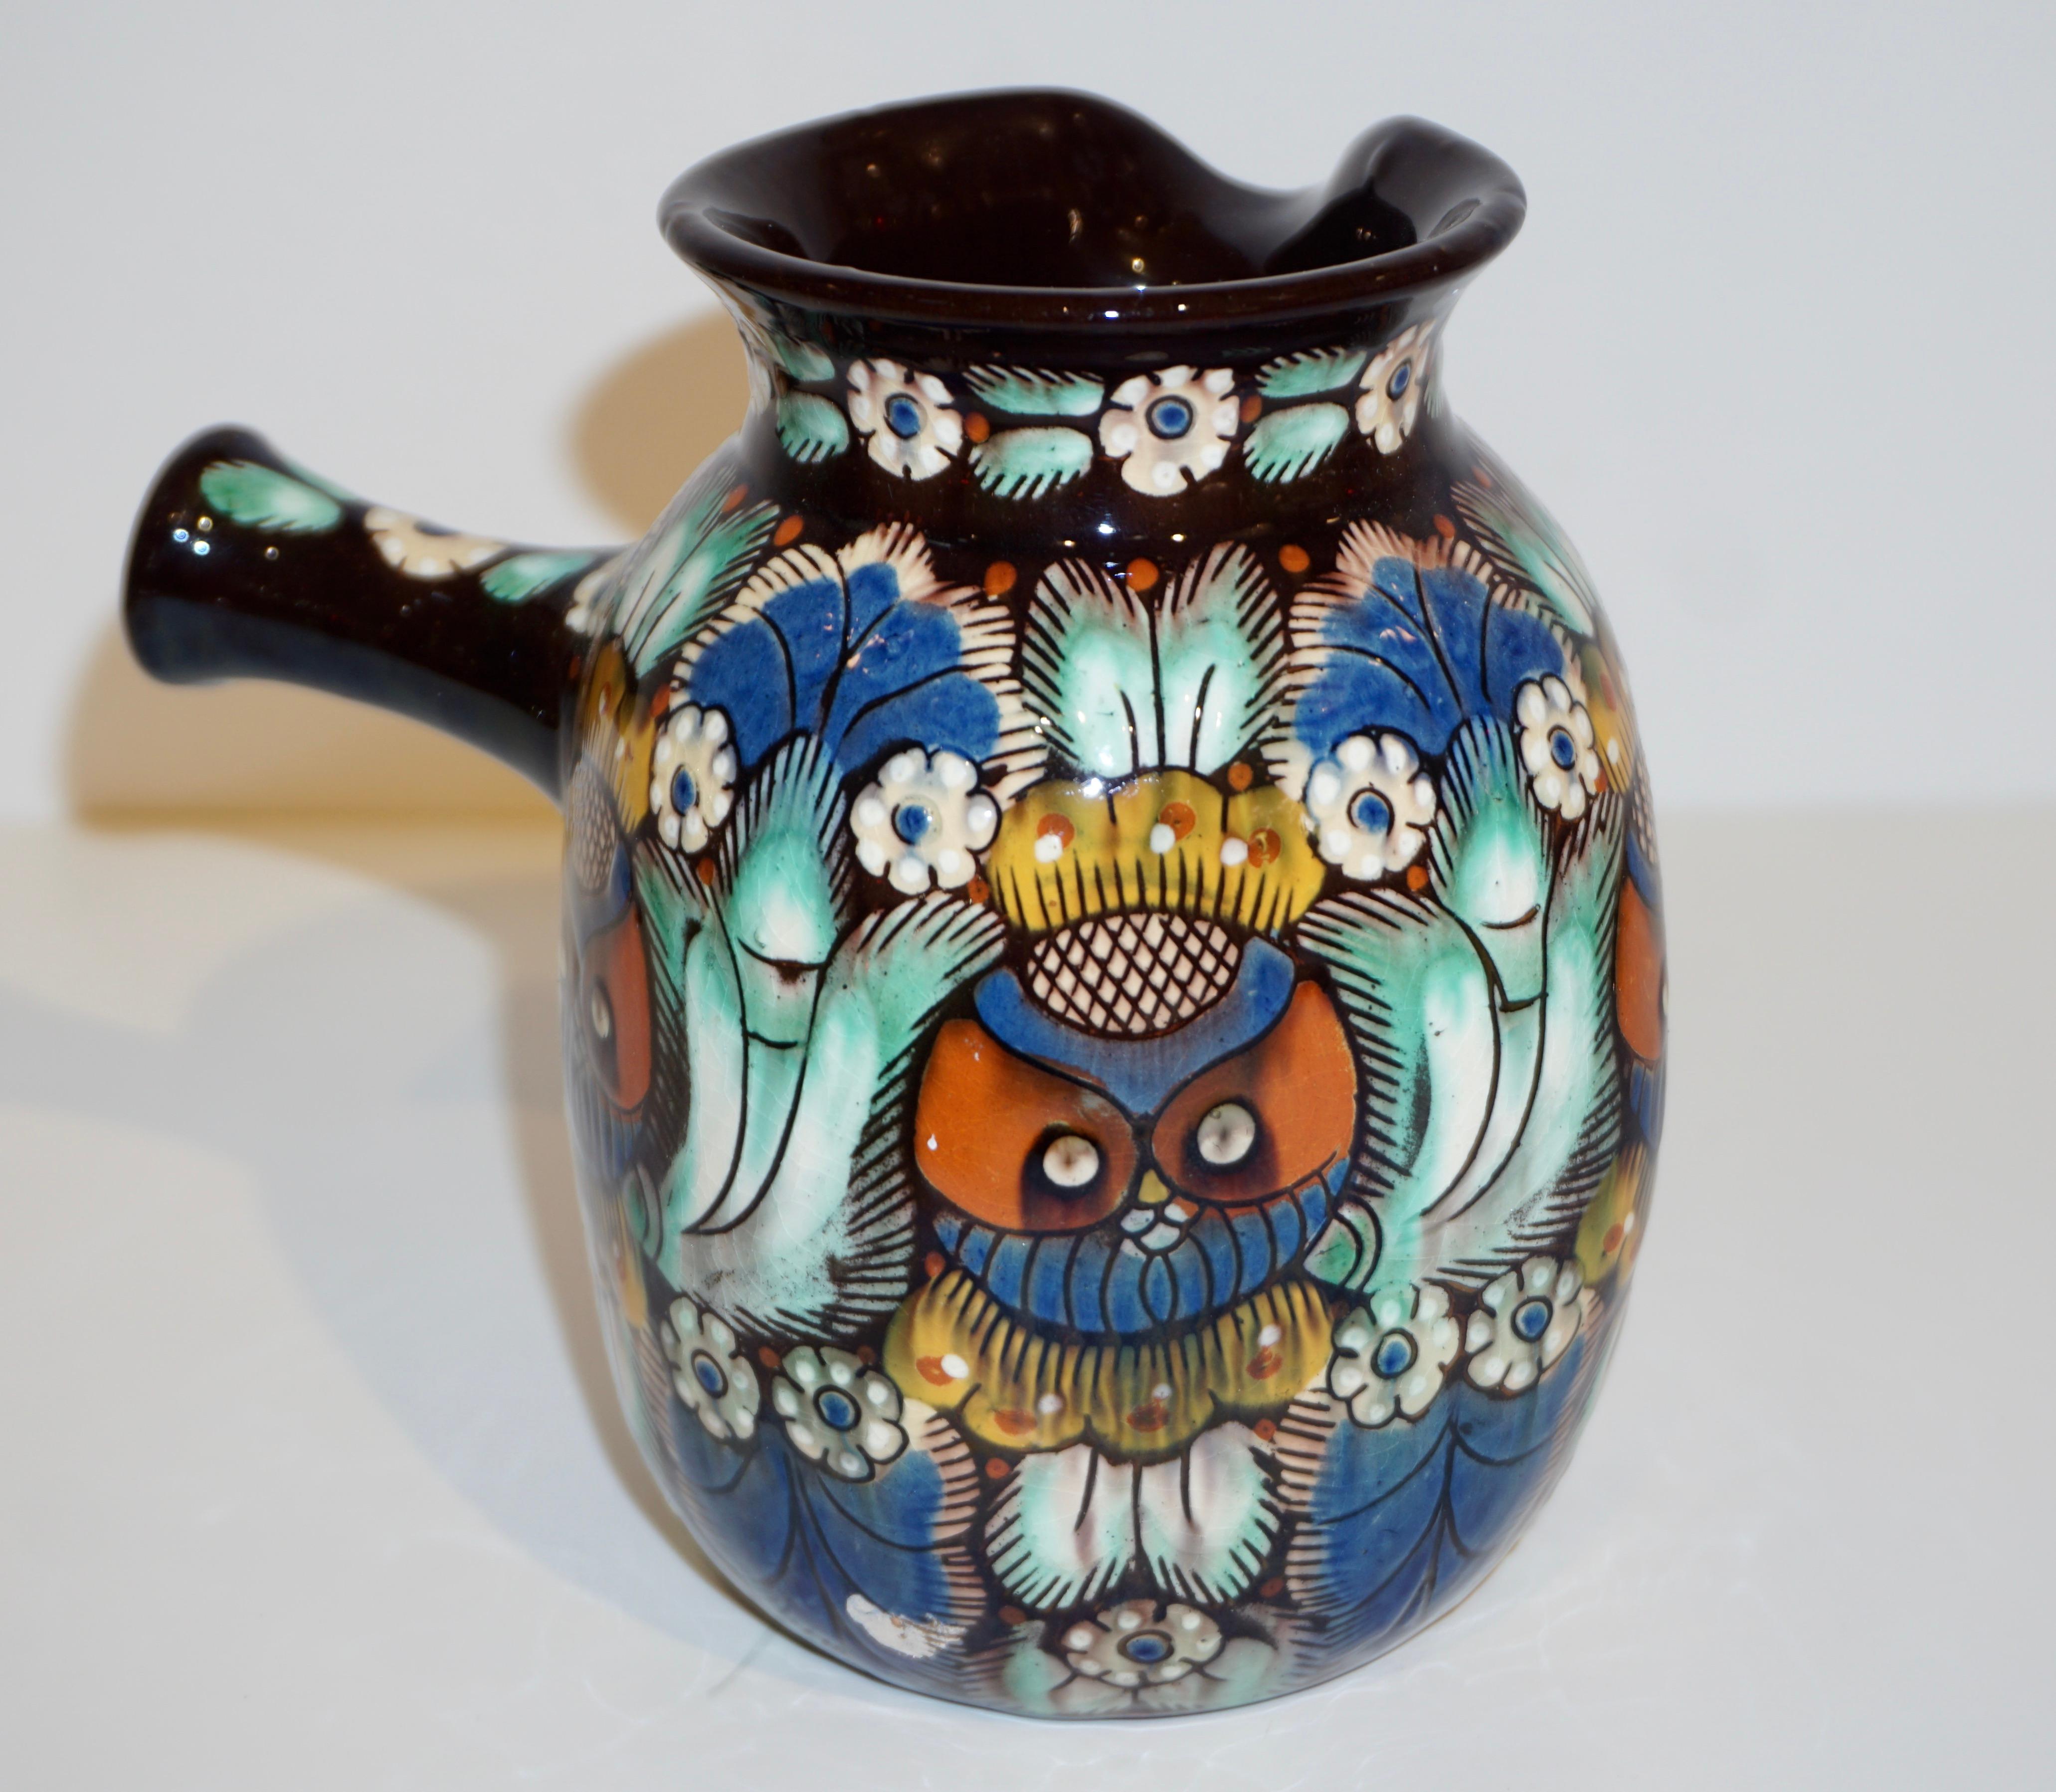 Early 20th century Arts & Crafts Majolica art pottery jug, made by the Swiss factory Thun/Thoune, circa 1910s. This jug, entirely handcrafted and hand-painted, is decorated with a modern Eastern accent design, on black background with vibrant